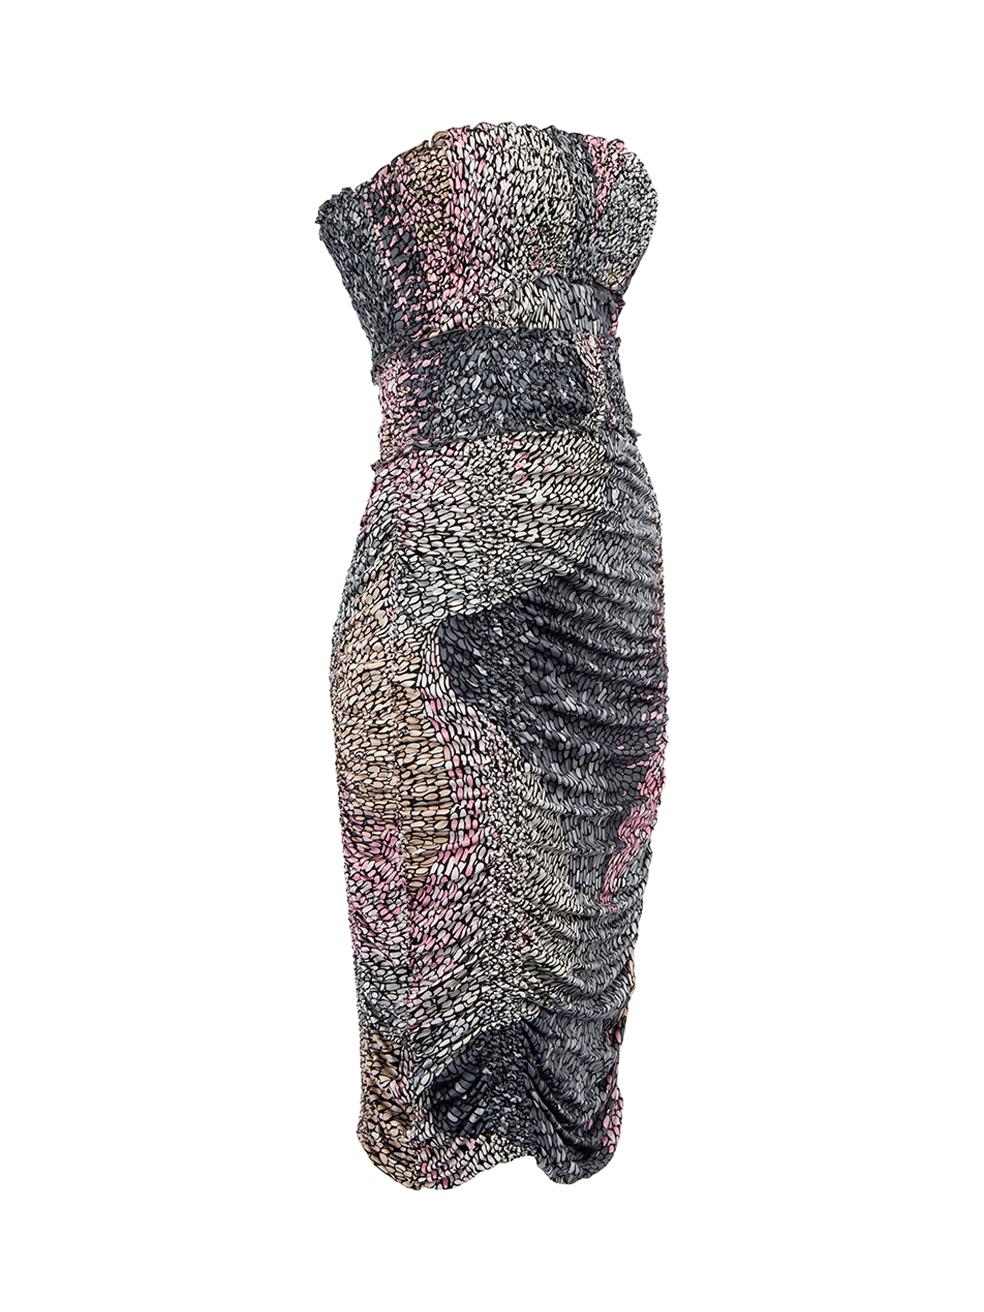 CONDITION is Very good. Hardly any visible wear to dress is evident on this used Missoni designer resale item. 
 
 
 
 Details
 
 
 Multicolour- Grey and pink
 
 Silk
 
 Strapless bustier dress
 
 Abstract pattern
 
 Knee length
 
 Ruched all over
